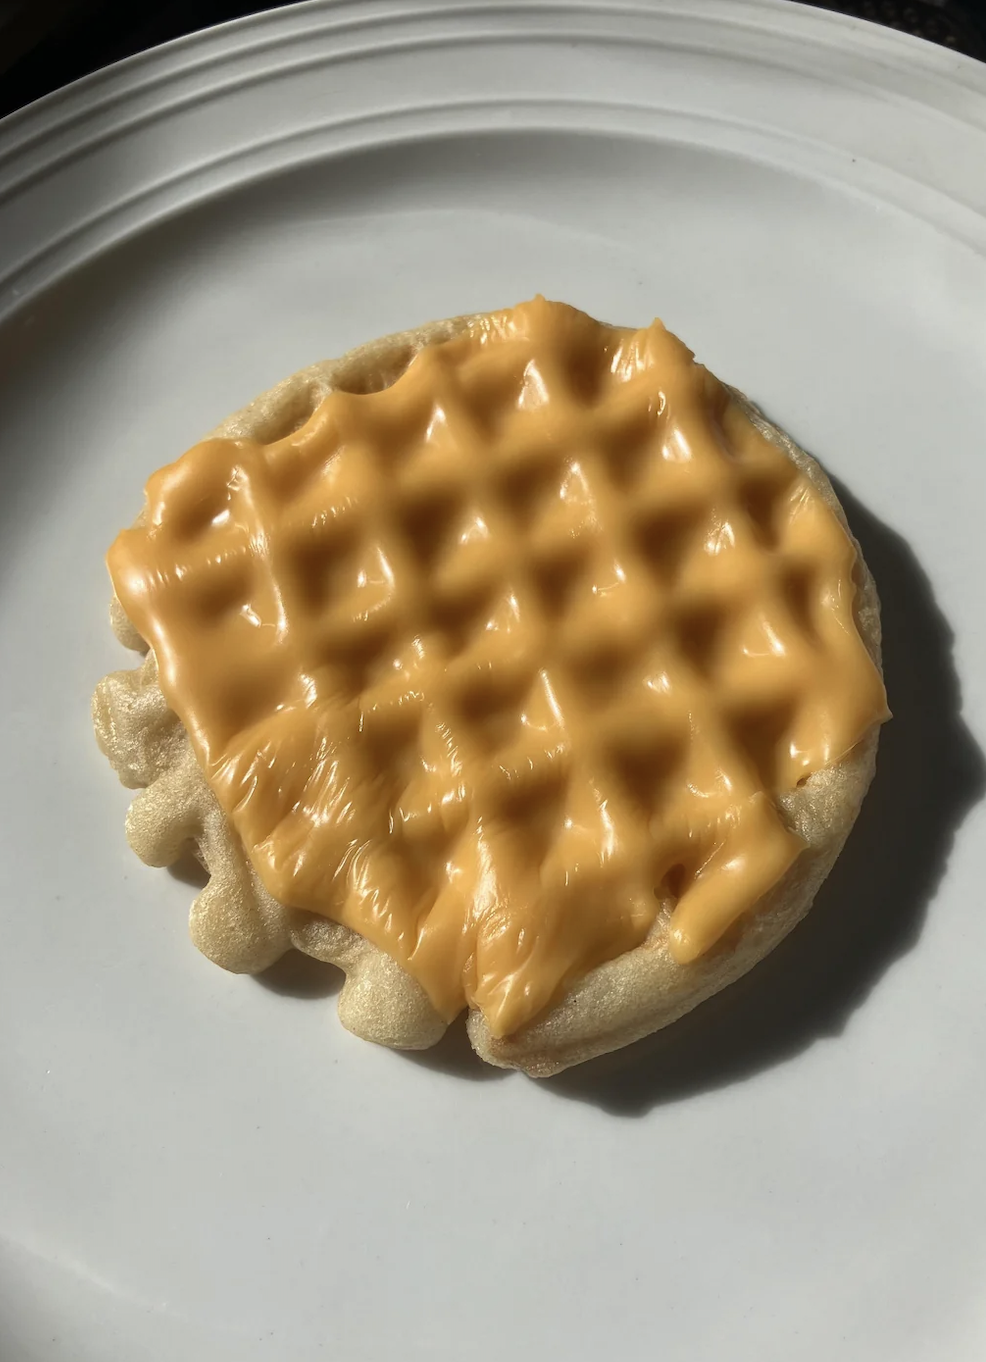 Melted cheese on a waffle, on a white plate under sunlight